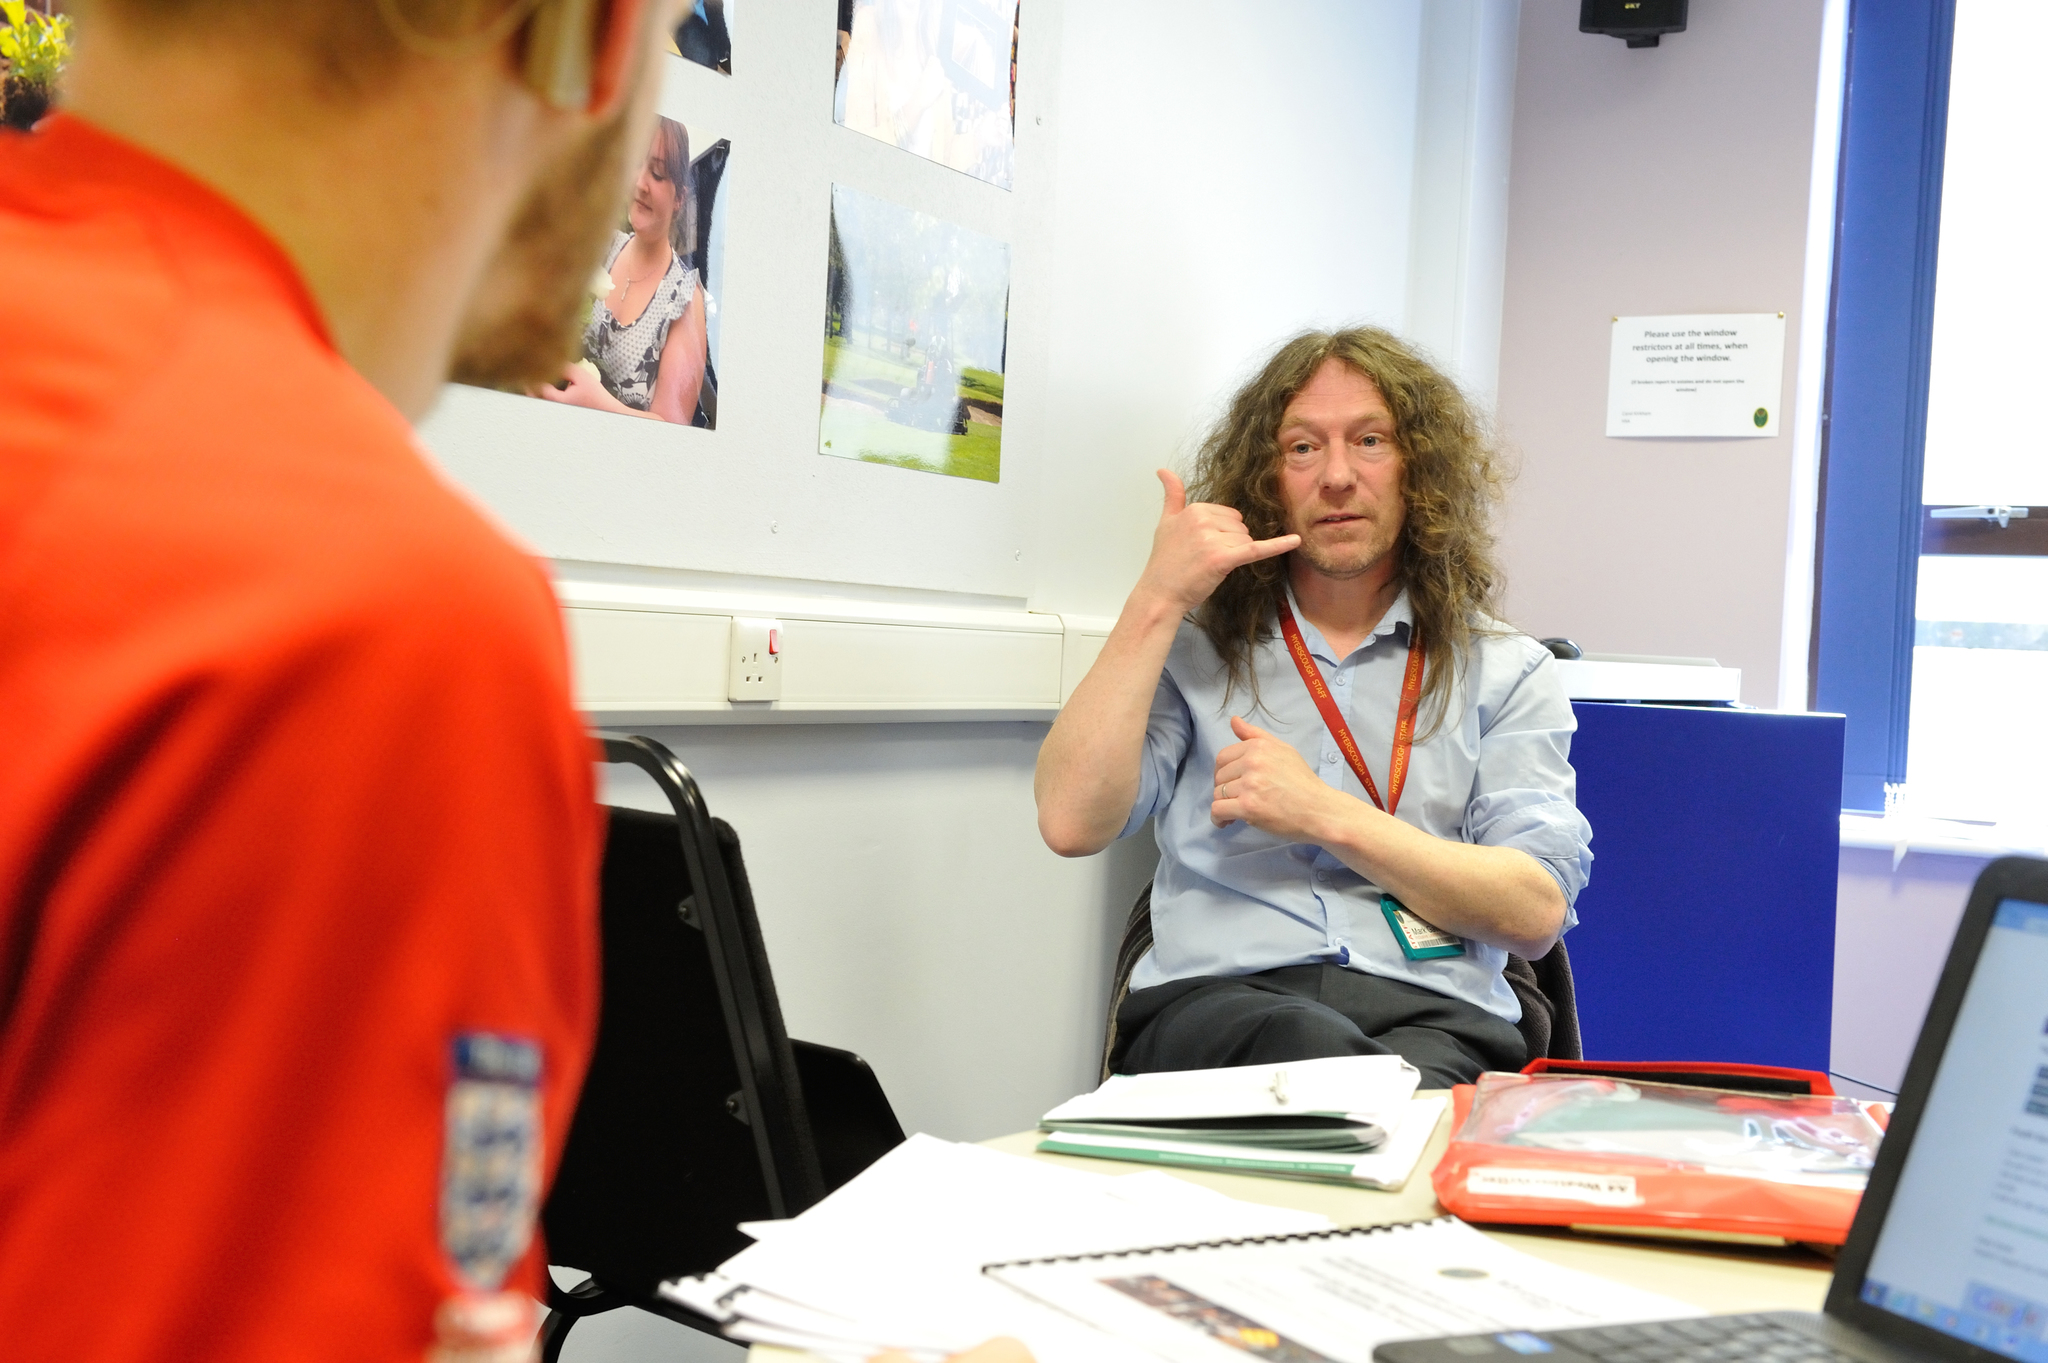 Myerscough College tutor communicating with a student using British Sign Language